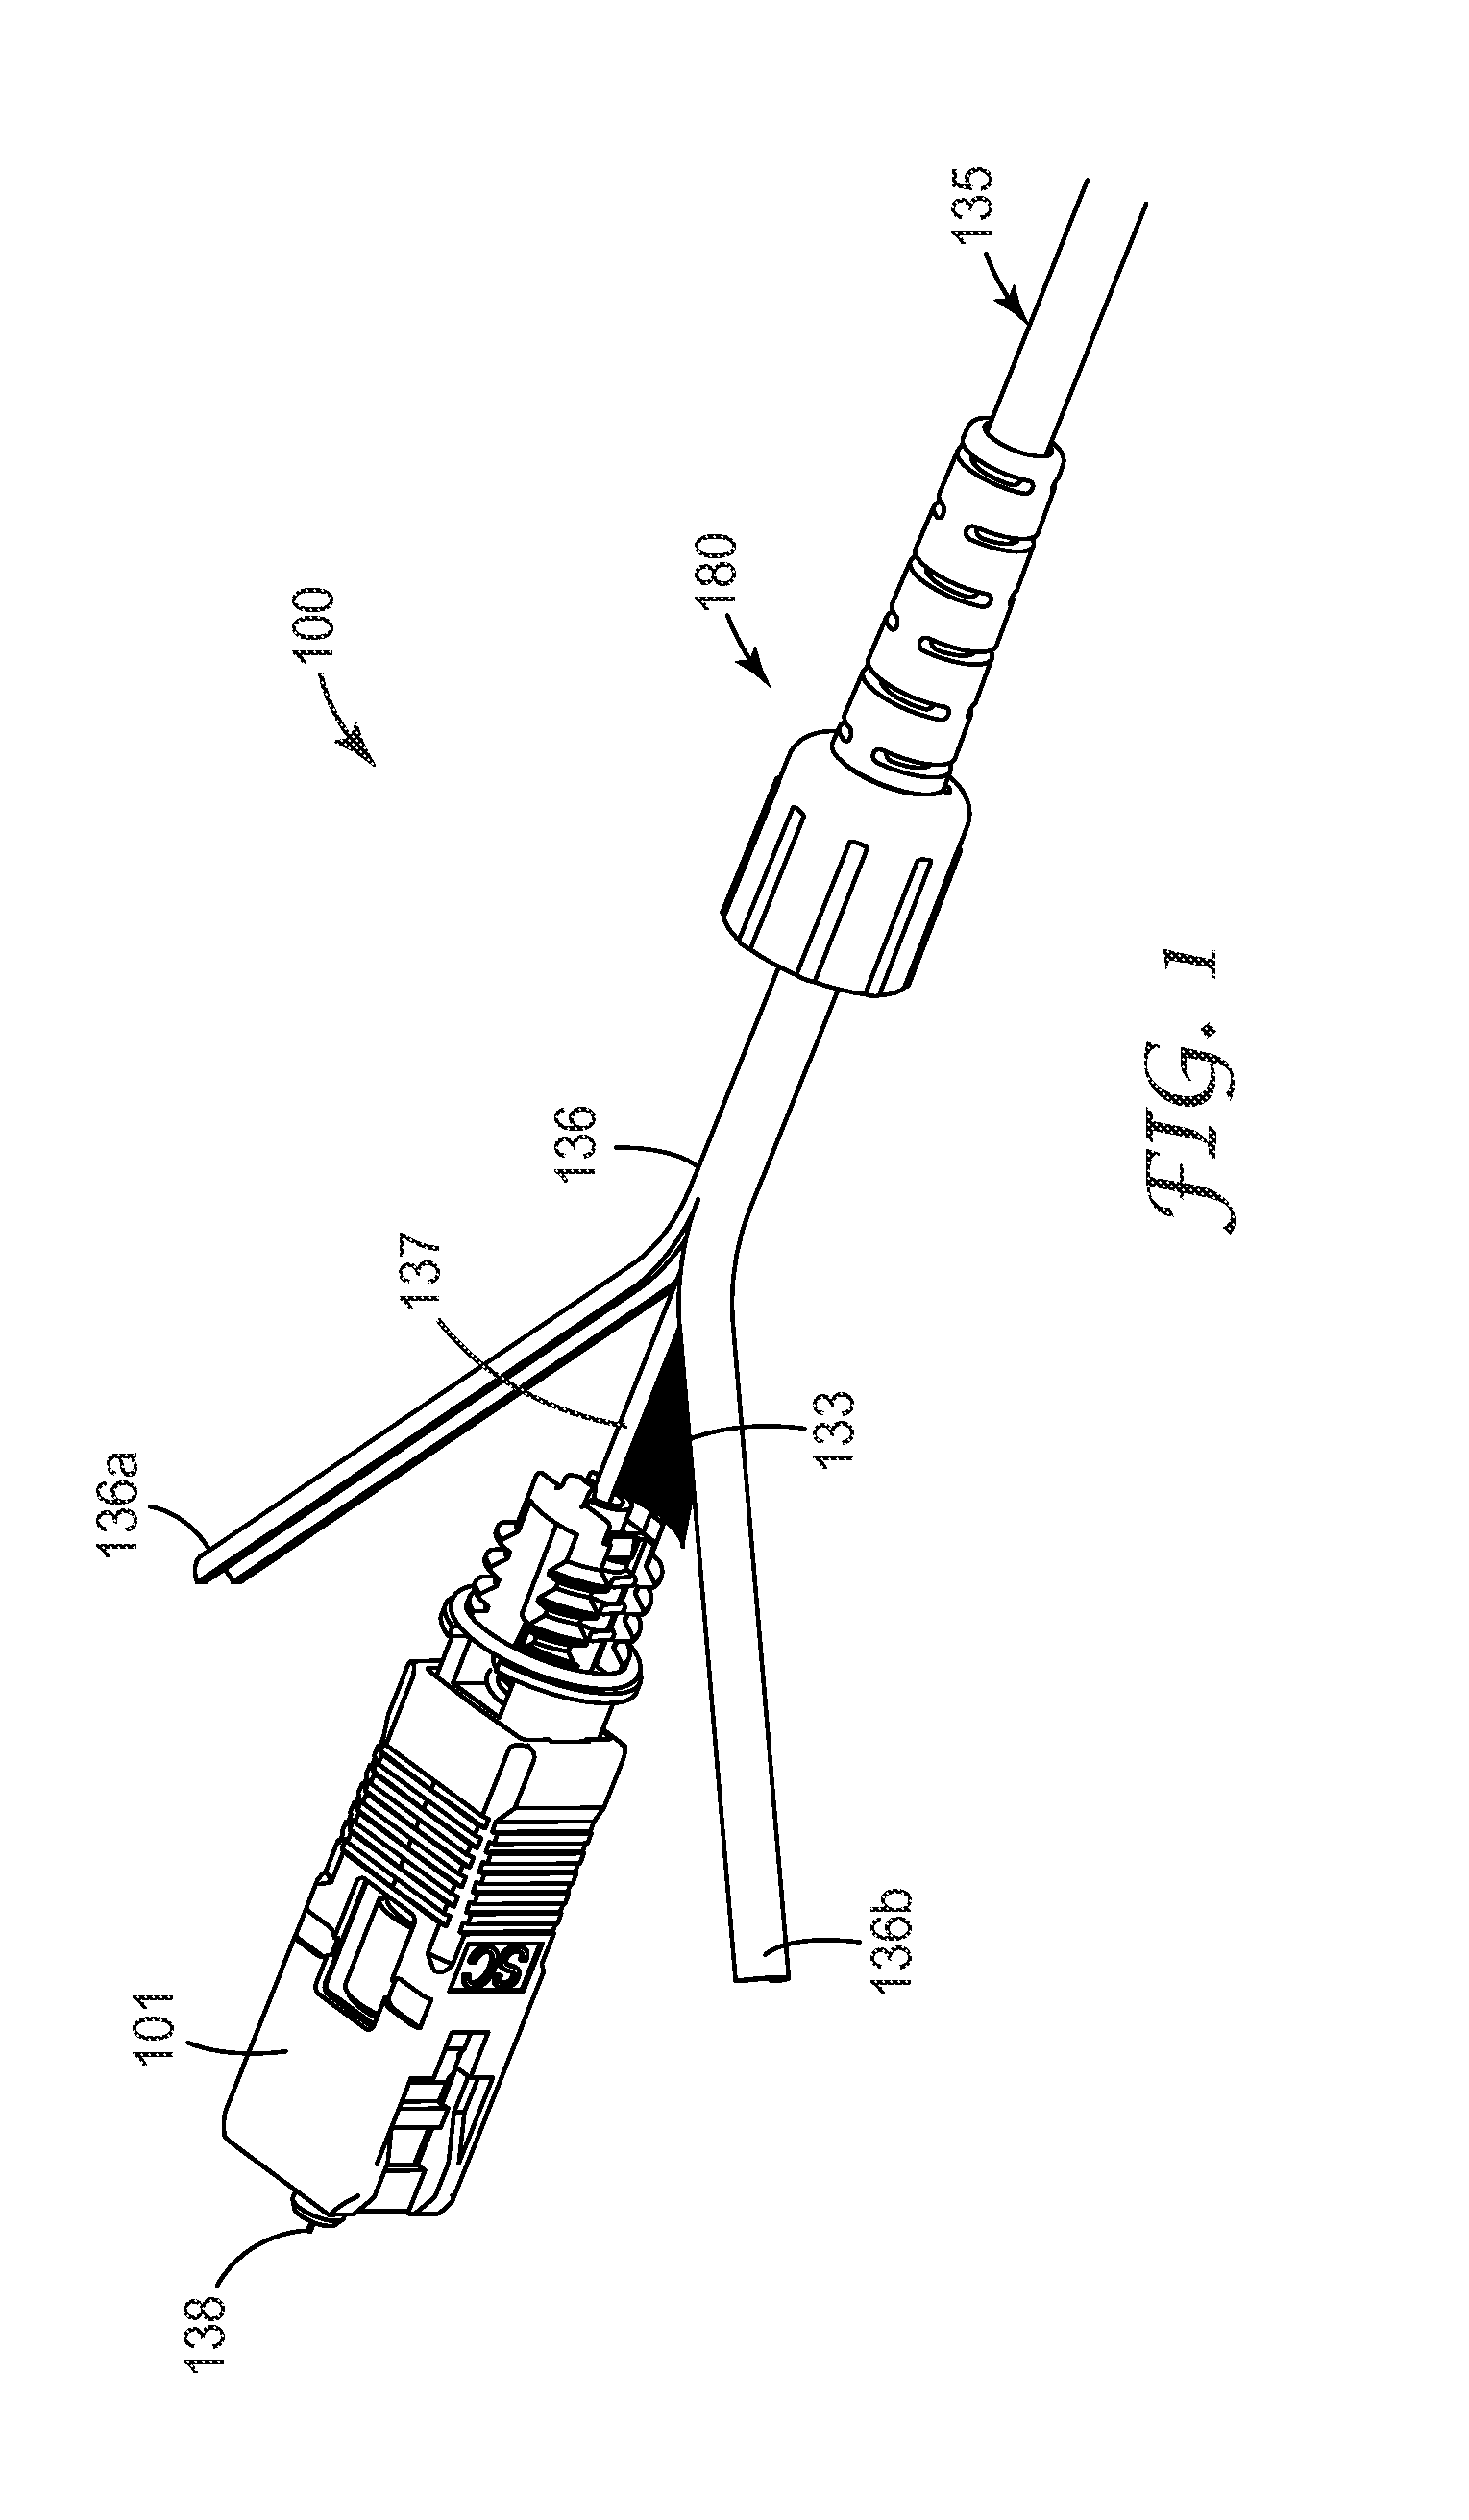 Optical connector for jacketed cables